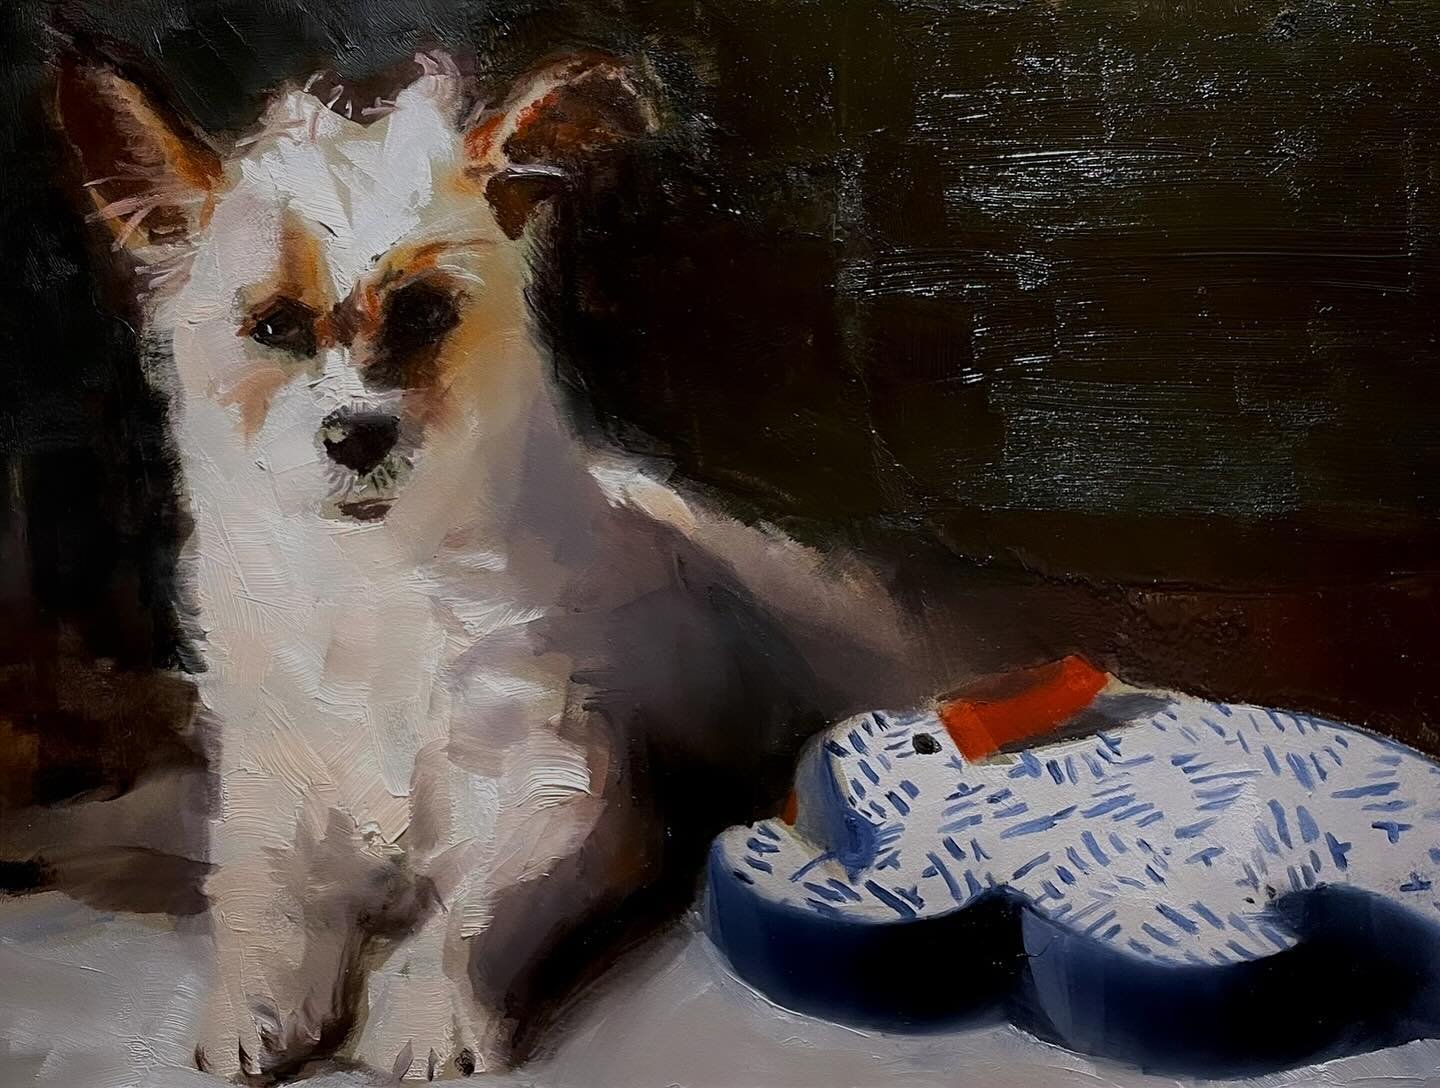 The girl with her favorite toy.
Oil on panel.
6x9 inches.

#dogportrait #oilpainting #dogtoy #niebergart